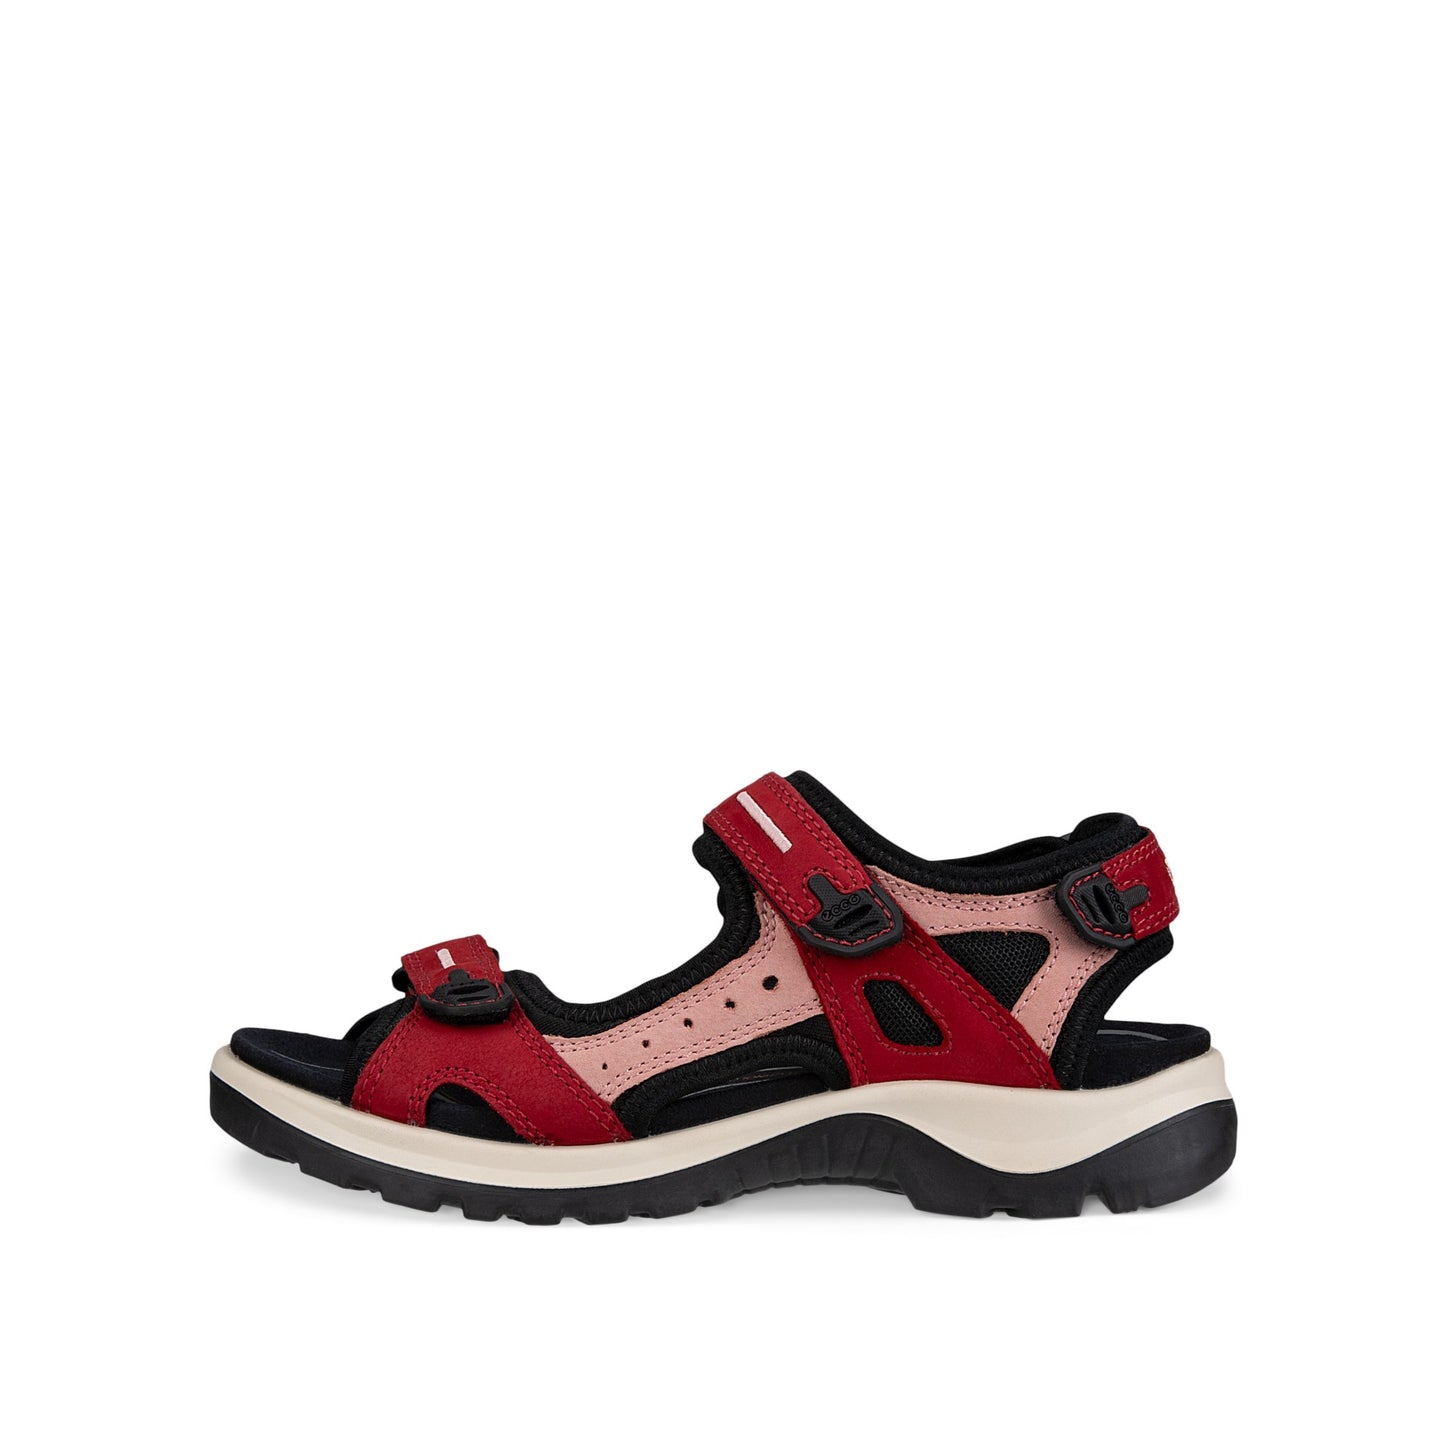 Ecco Ladies Off-Road 069563 - Chili Red/Damask Rose